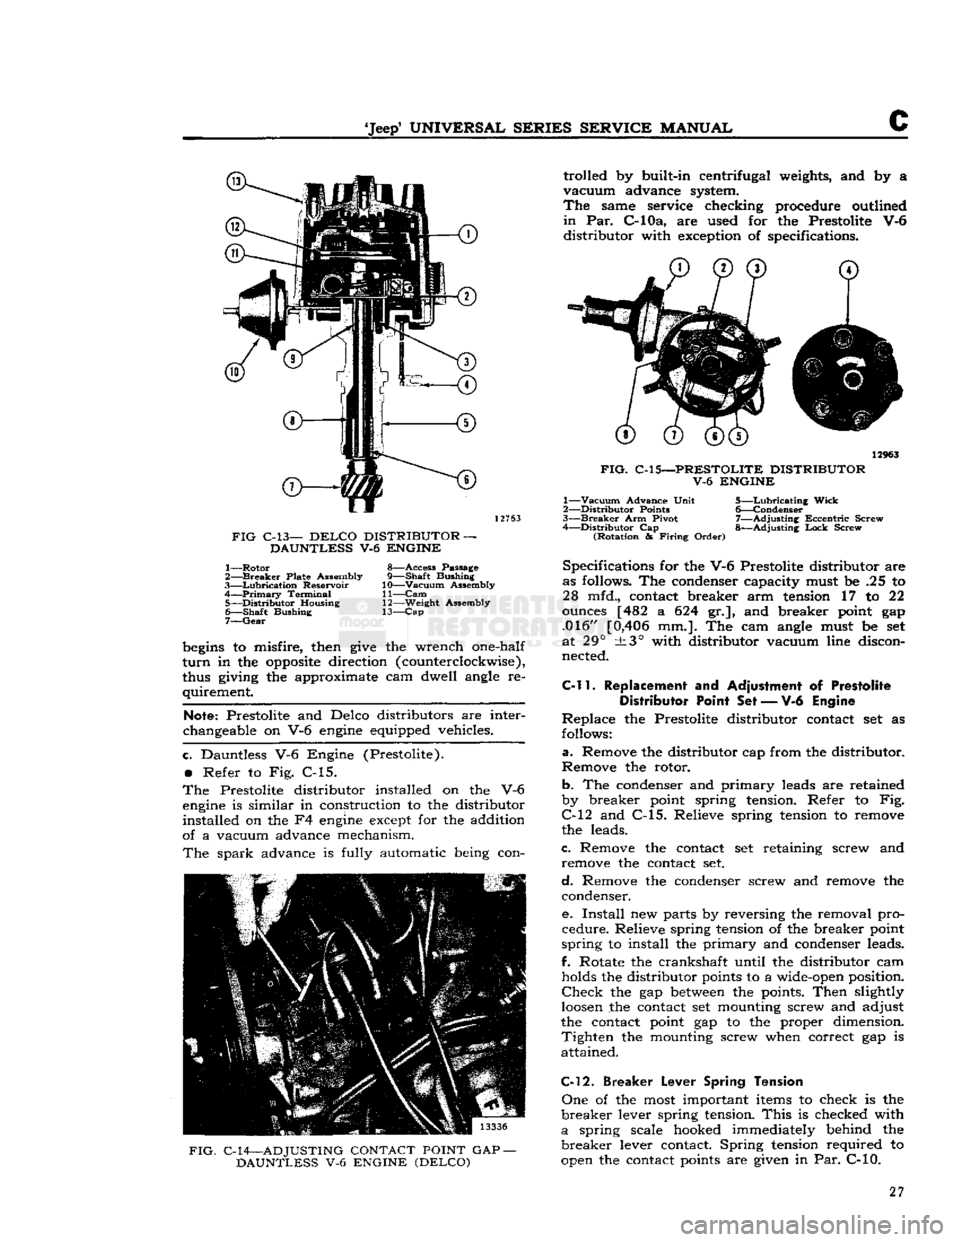 JEEP CJ 1953  Service Manual 
Jeep*
 UNIVERSAL
 SERIES SERVICE
 MANUAL 

C 
12763 

FIG
 C-13—
 DELCO
 DISTRIBUTOR — 
DAUNTLESS V-6 ENGINE 
1—
 Rotor
 8—Access Passage 

2—
 Breaker
 Plate Assembly 9—Shaft Bushing 
3